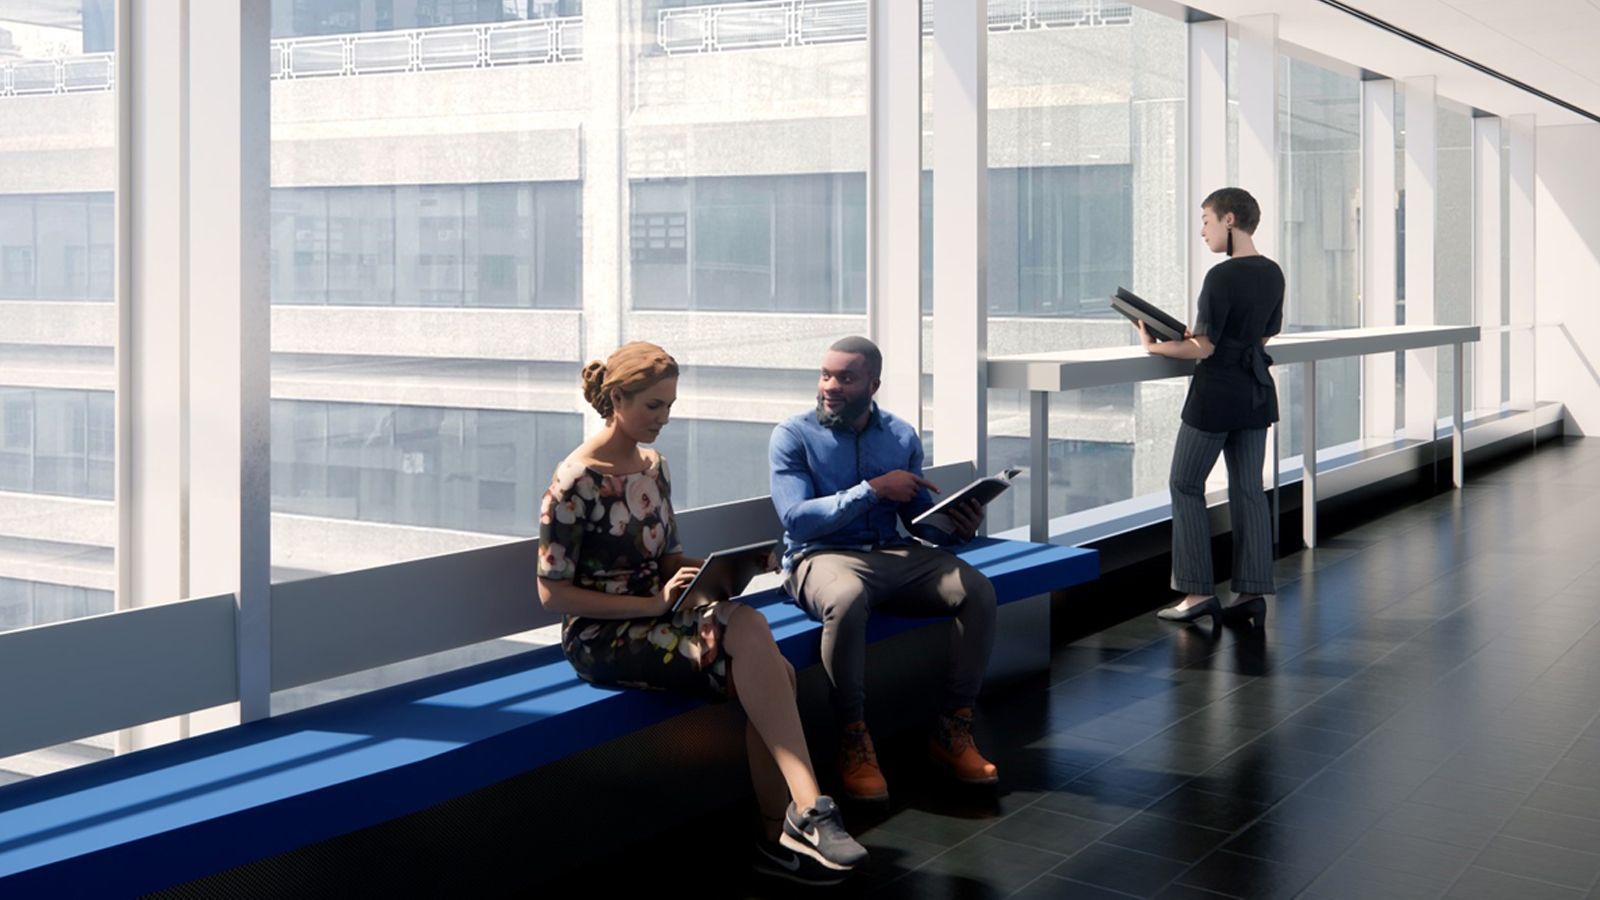 A rendering showing people sitting on new seats on Hunter's skybridge